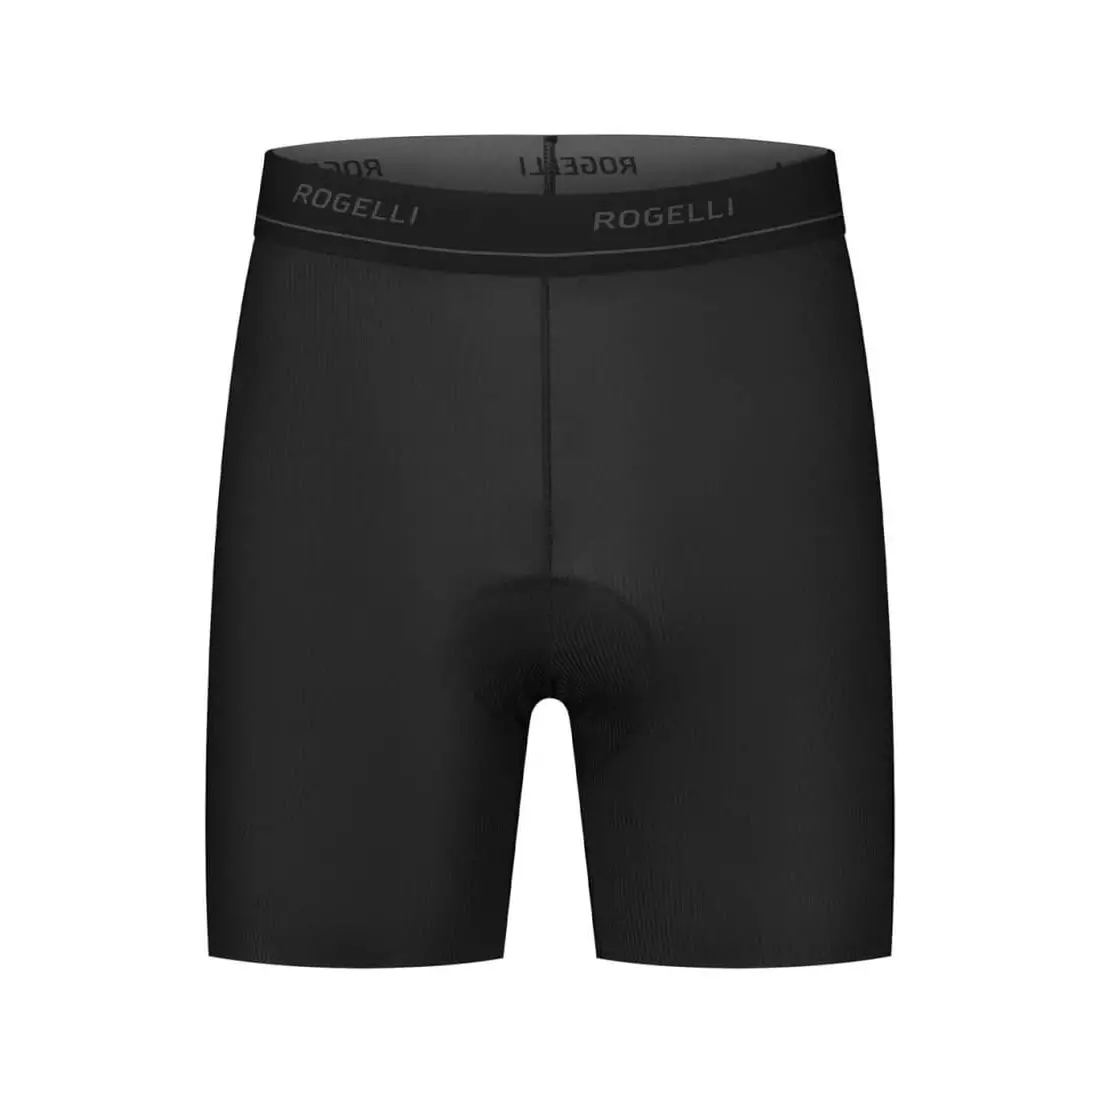 Men Bike Padded Shorts with -Slip Leg Grips Cycling 3D Padded Underwear  Bicycle Padding Riding Shorts Biking Underwear Shorts